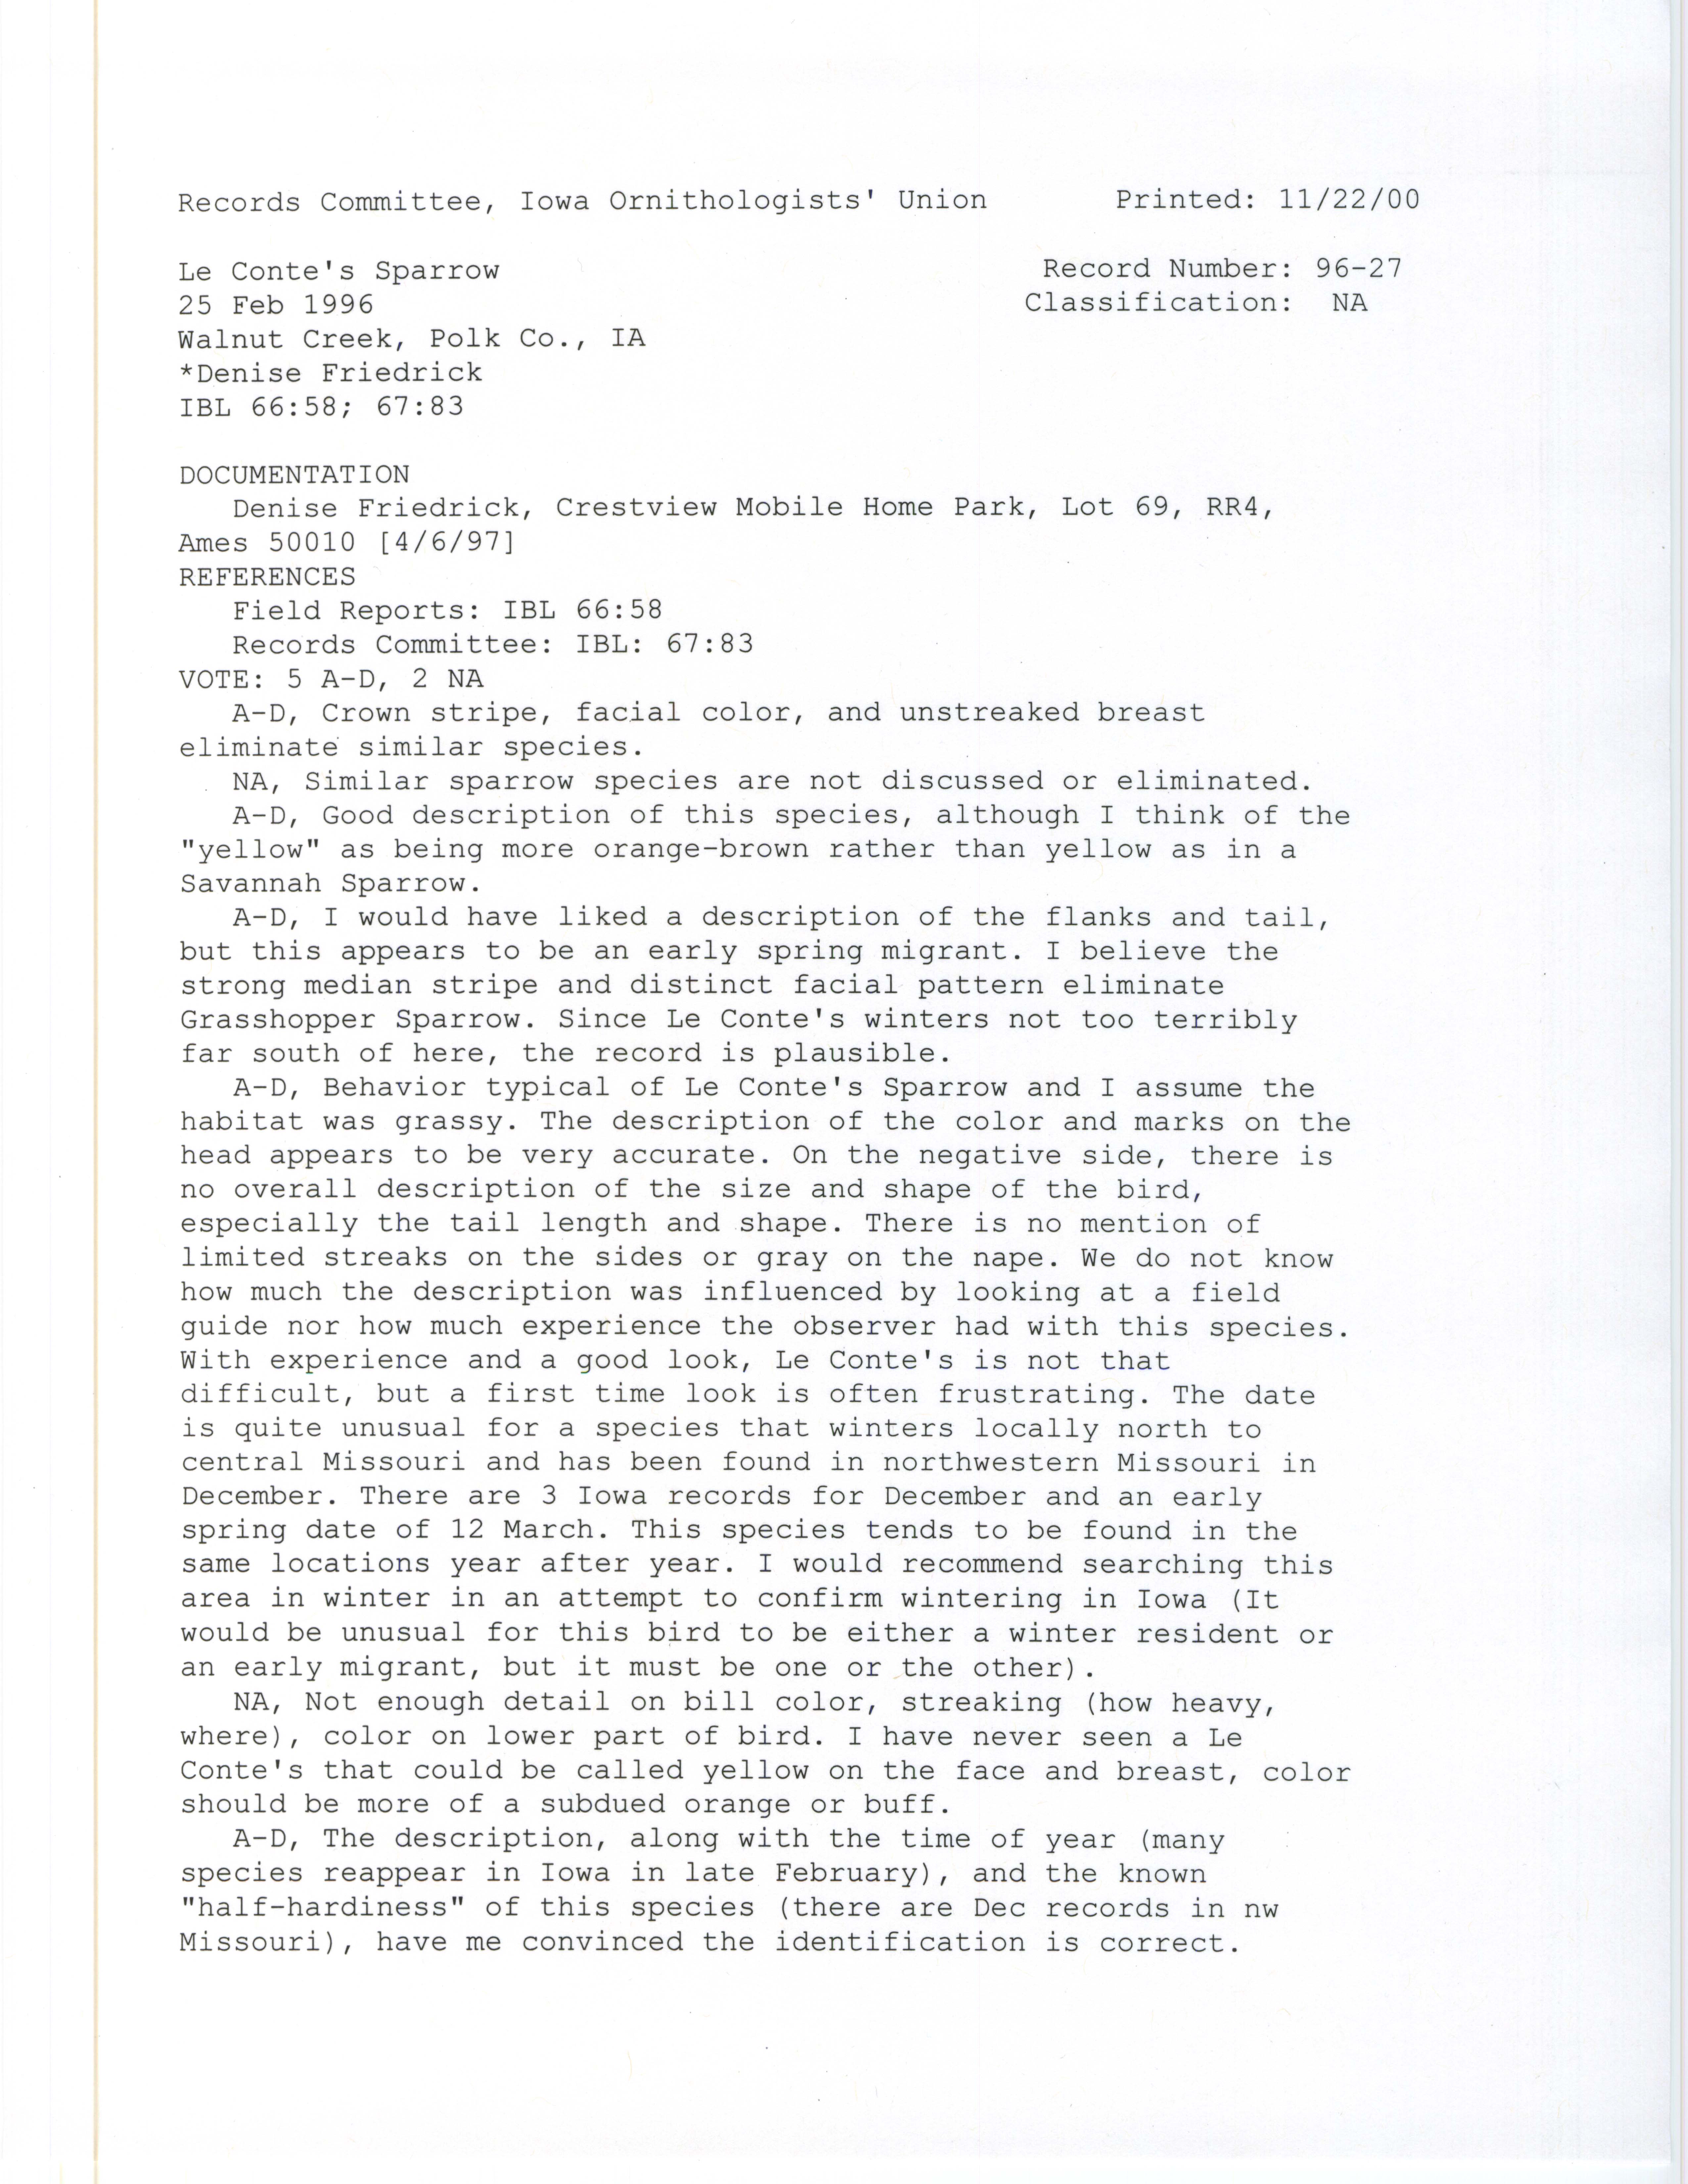 Records Committee review for rare bird sighting for Le Conte's Sparrow at Walnut Creek National Wildlife Refuge, 1996